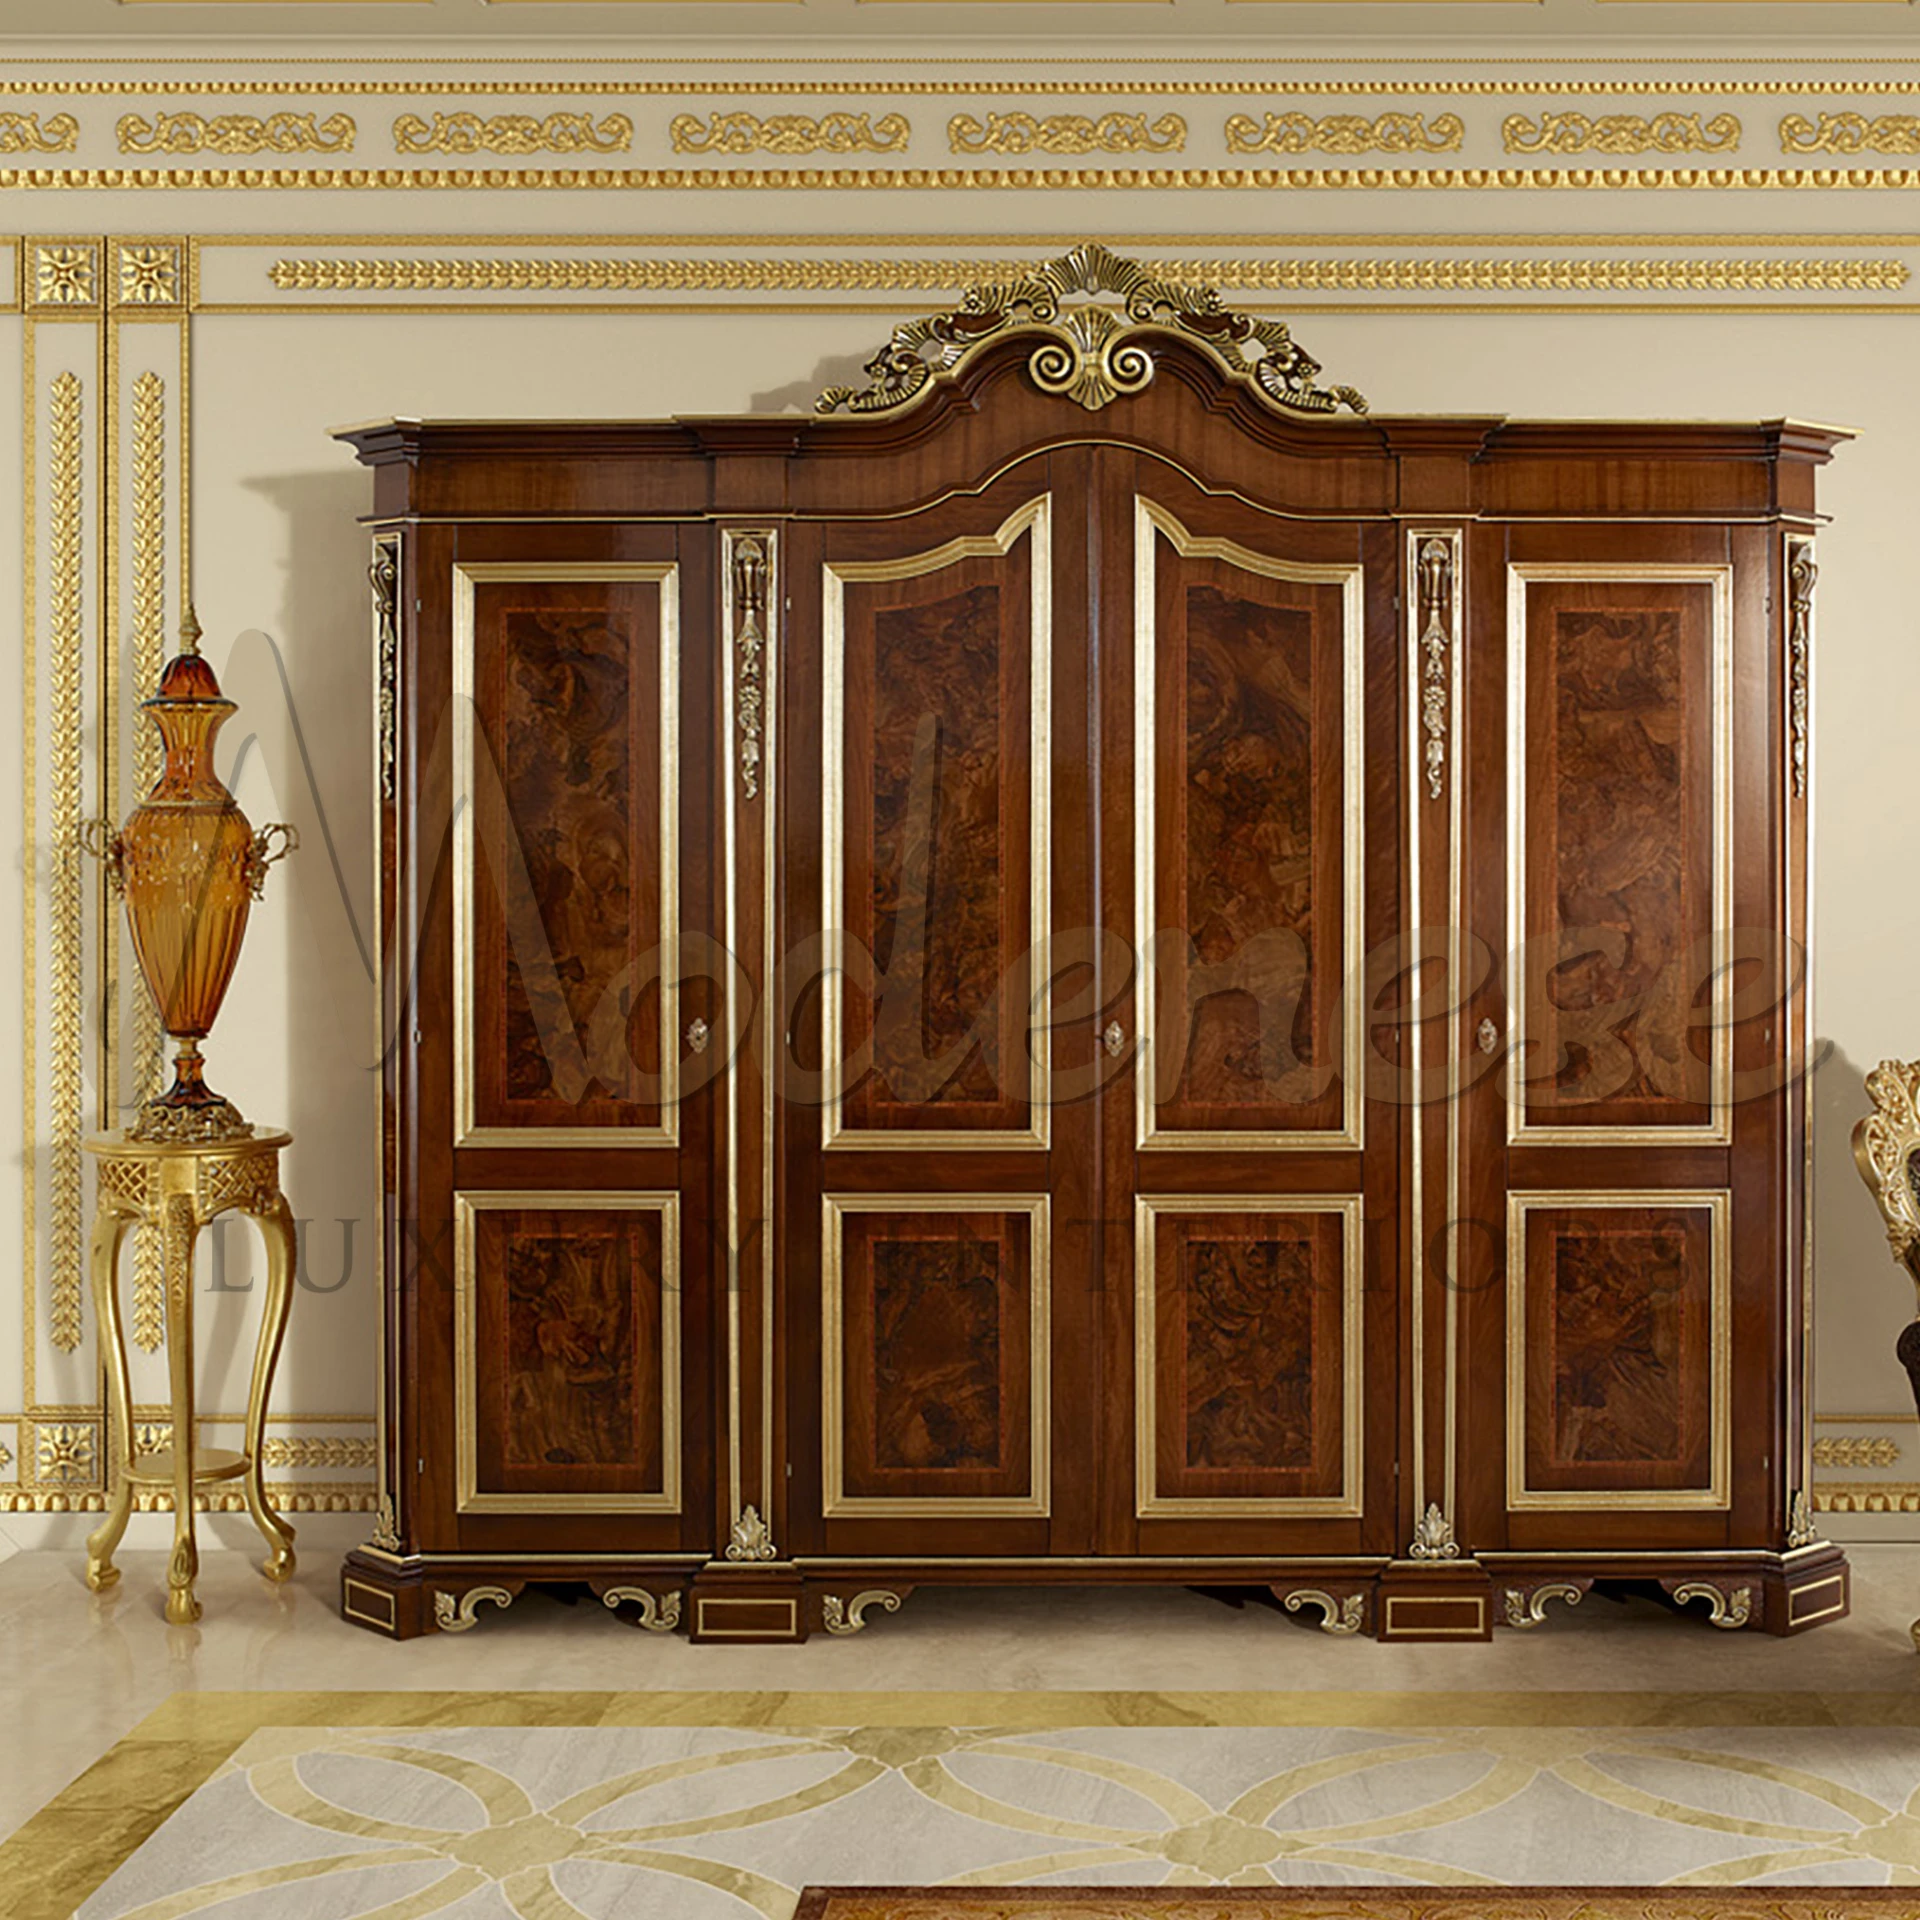 Classic style wooden armoire with detailed carvings and a decorative top crest by Modenese Furniture Manufacturer                                                                                                                                             